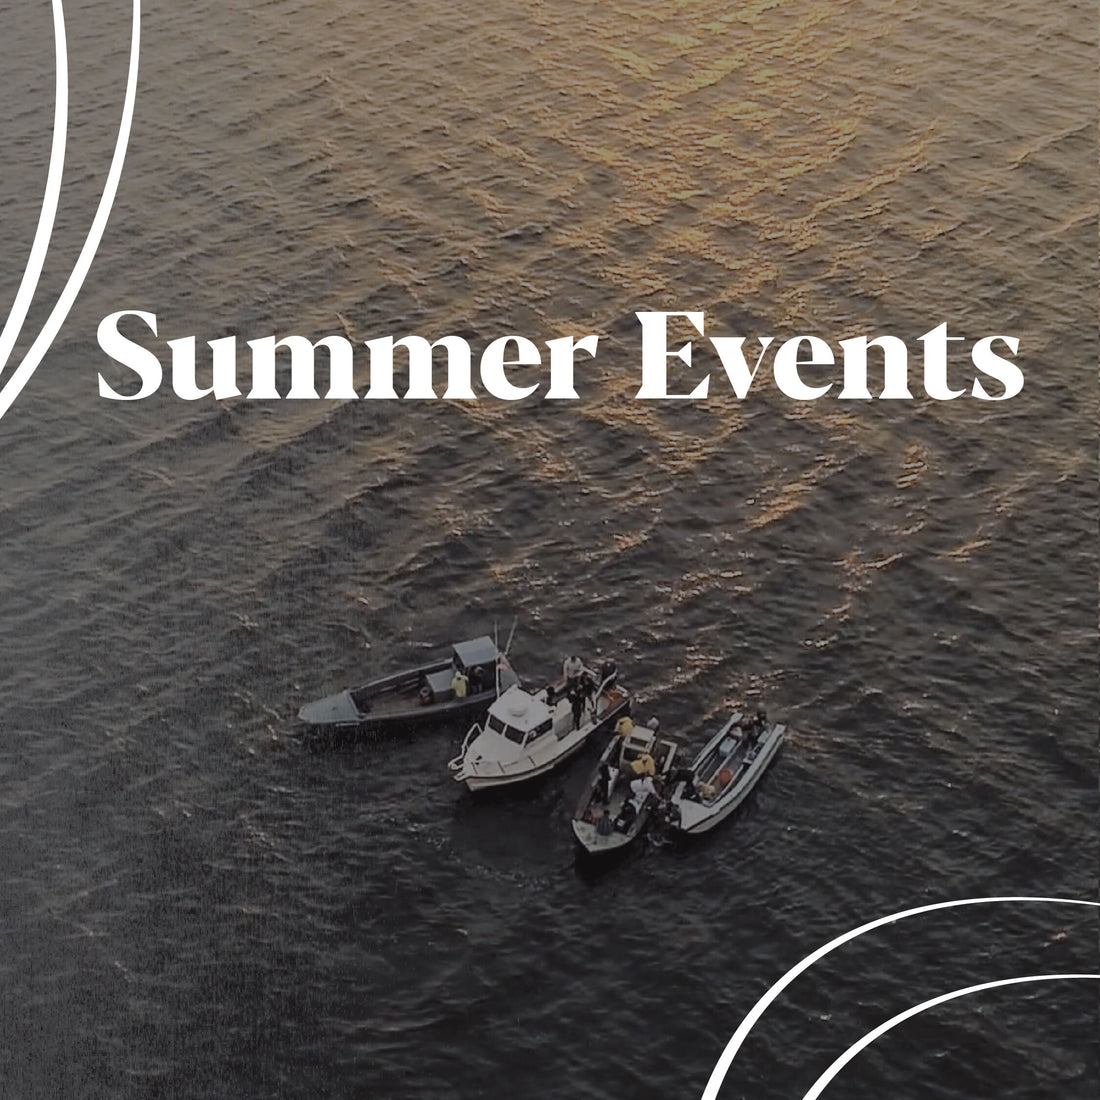 Summer Events